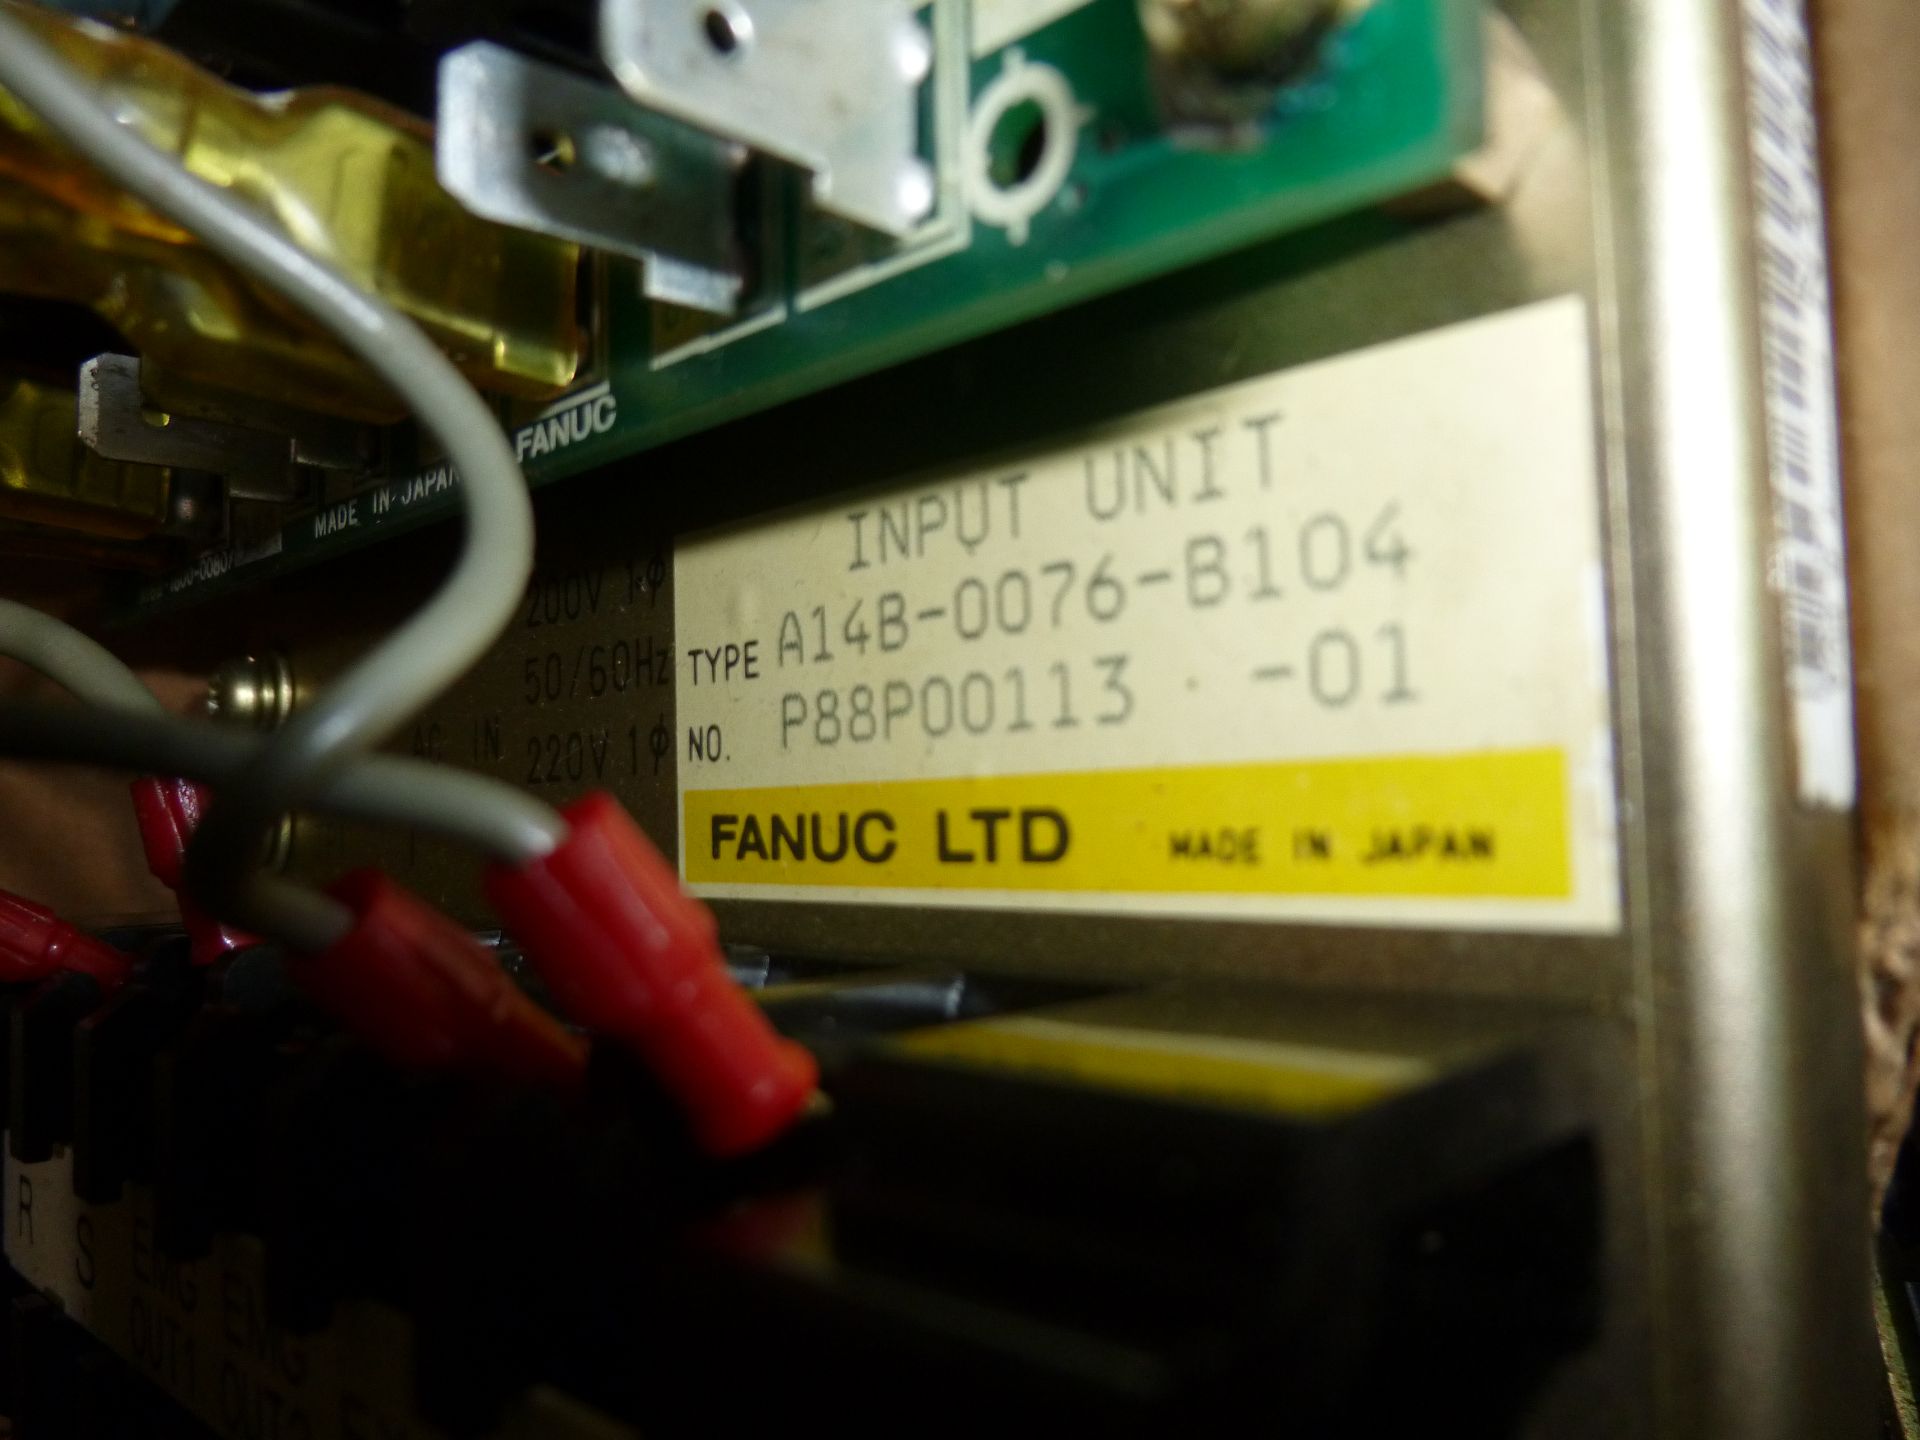 Fanuc input unit model A14B-0076-B104, as always with Brolyn LLC auctions, all lots can be picked up - Image 2 of 2